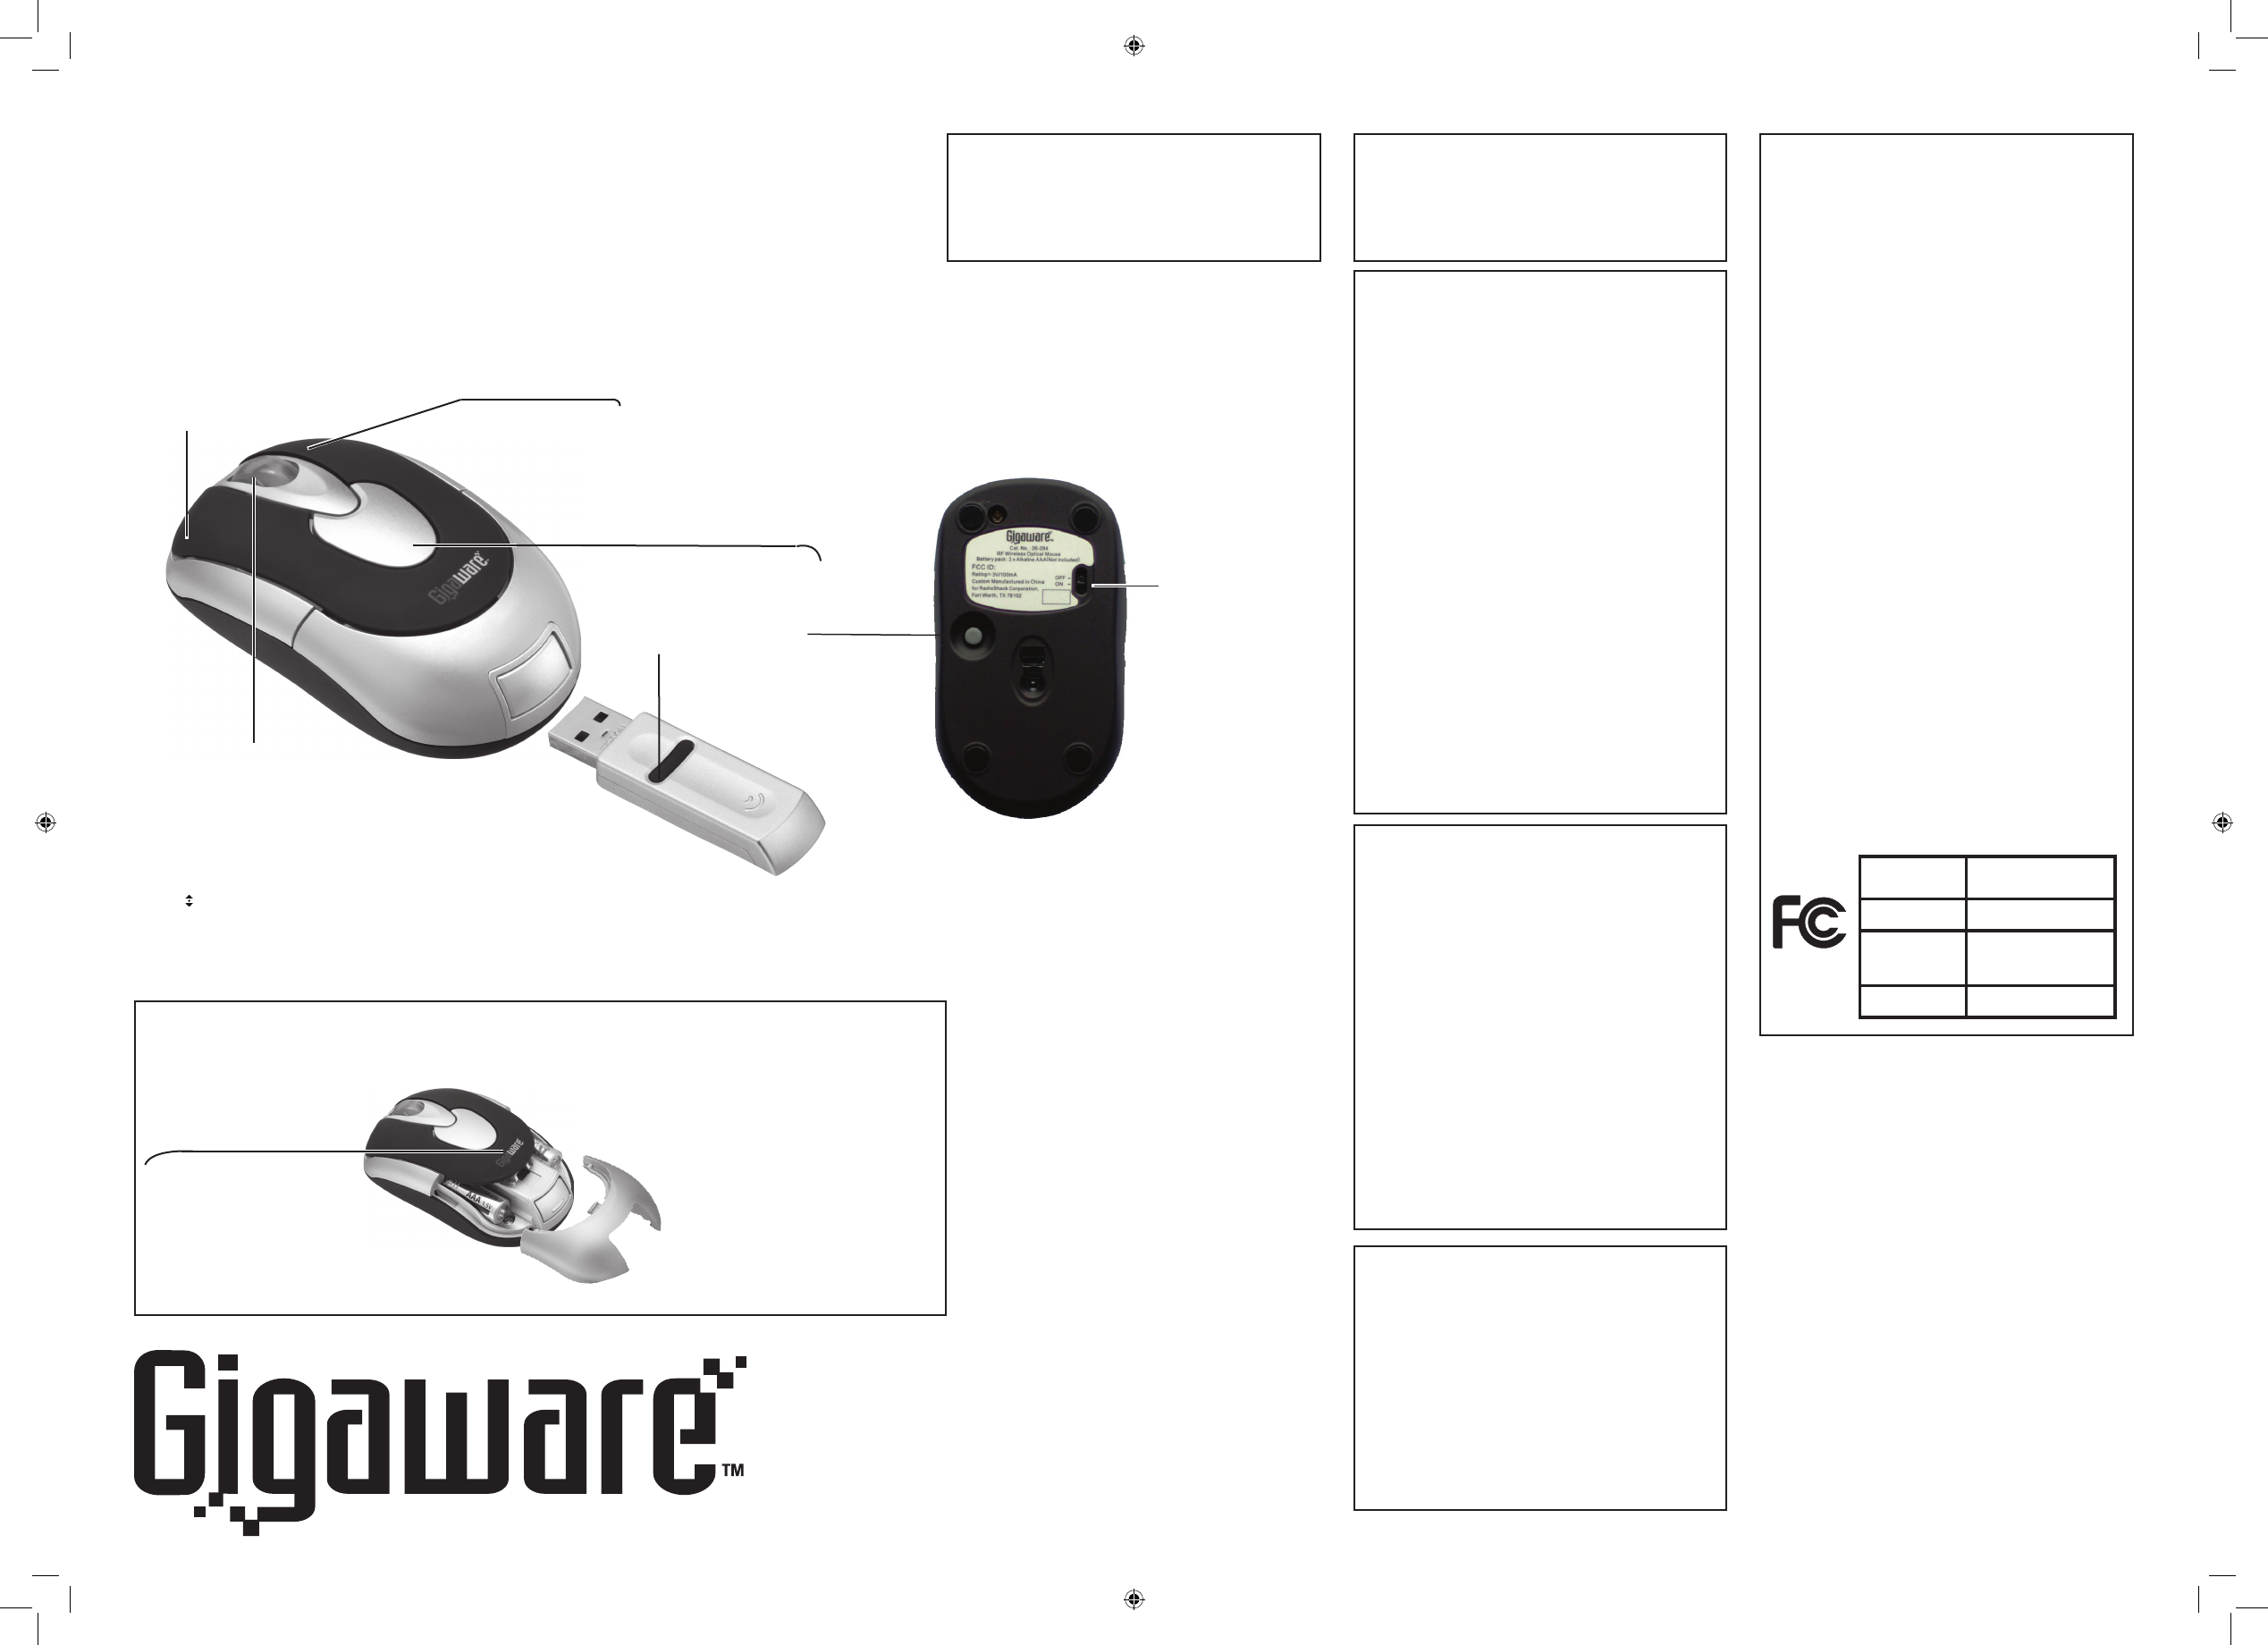 gigaware wireless optical mouse 26-284